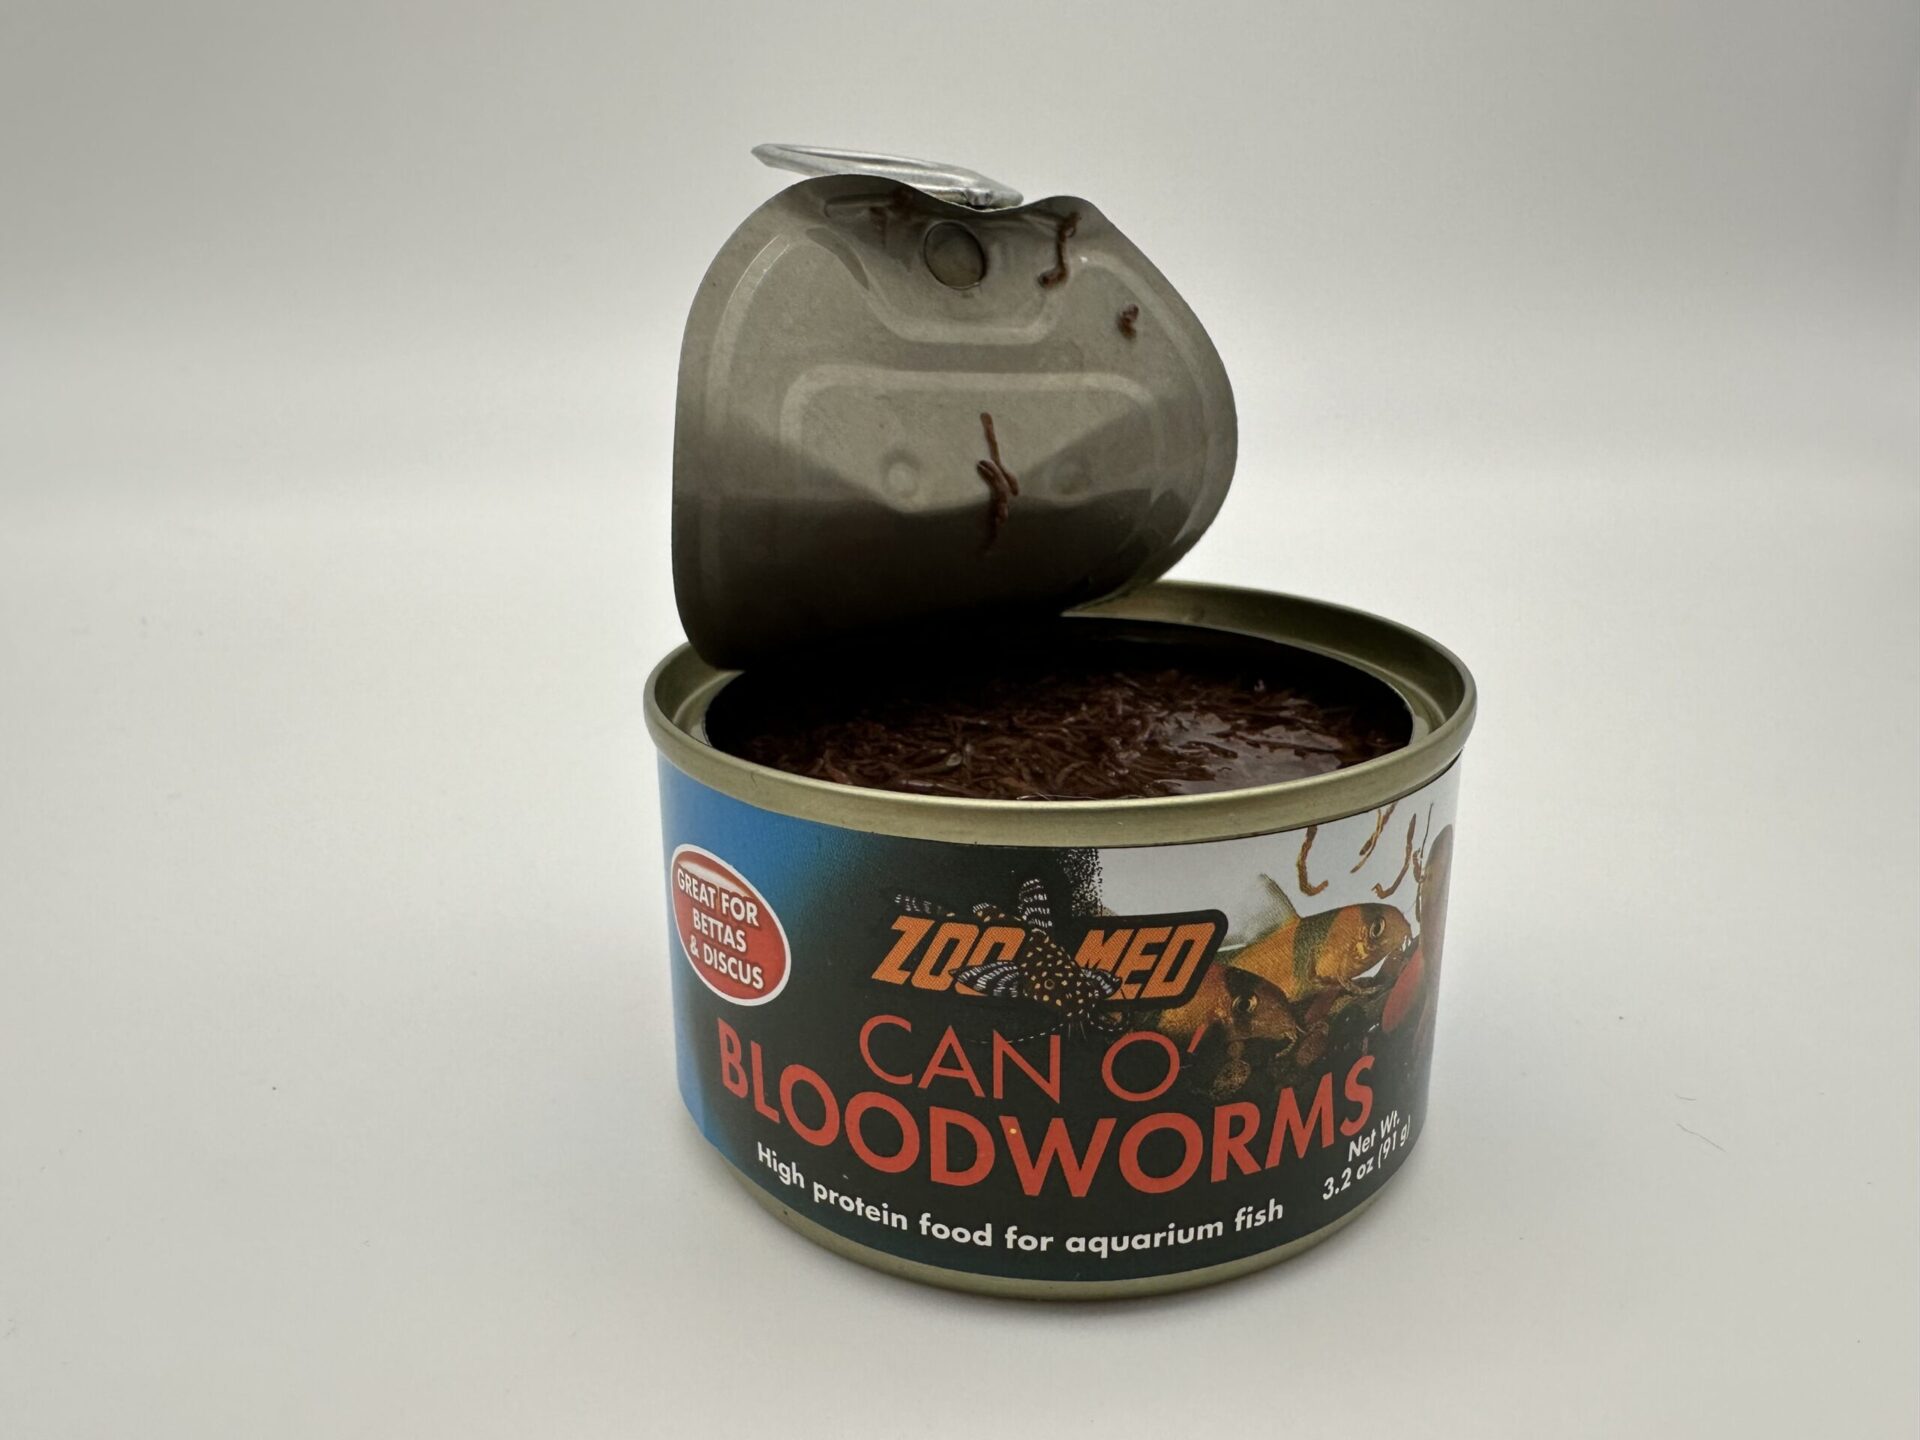 Zoo Med Can O' Bloodworms: A Canned Fish Food?